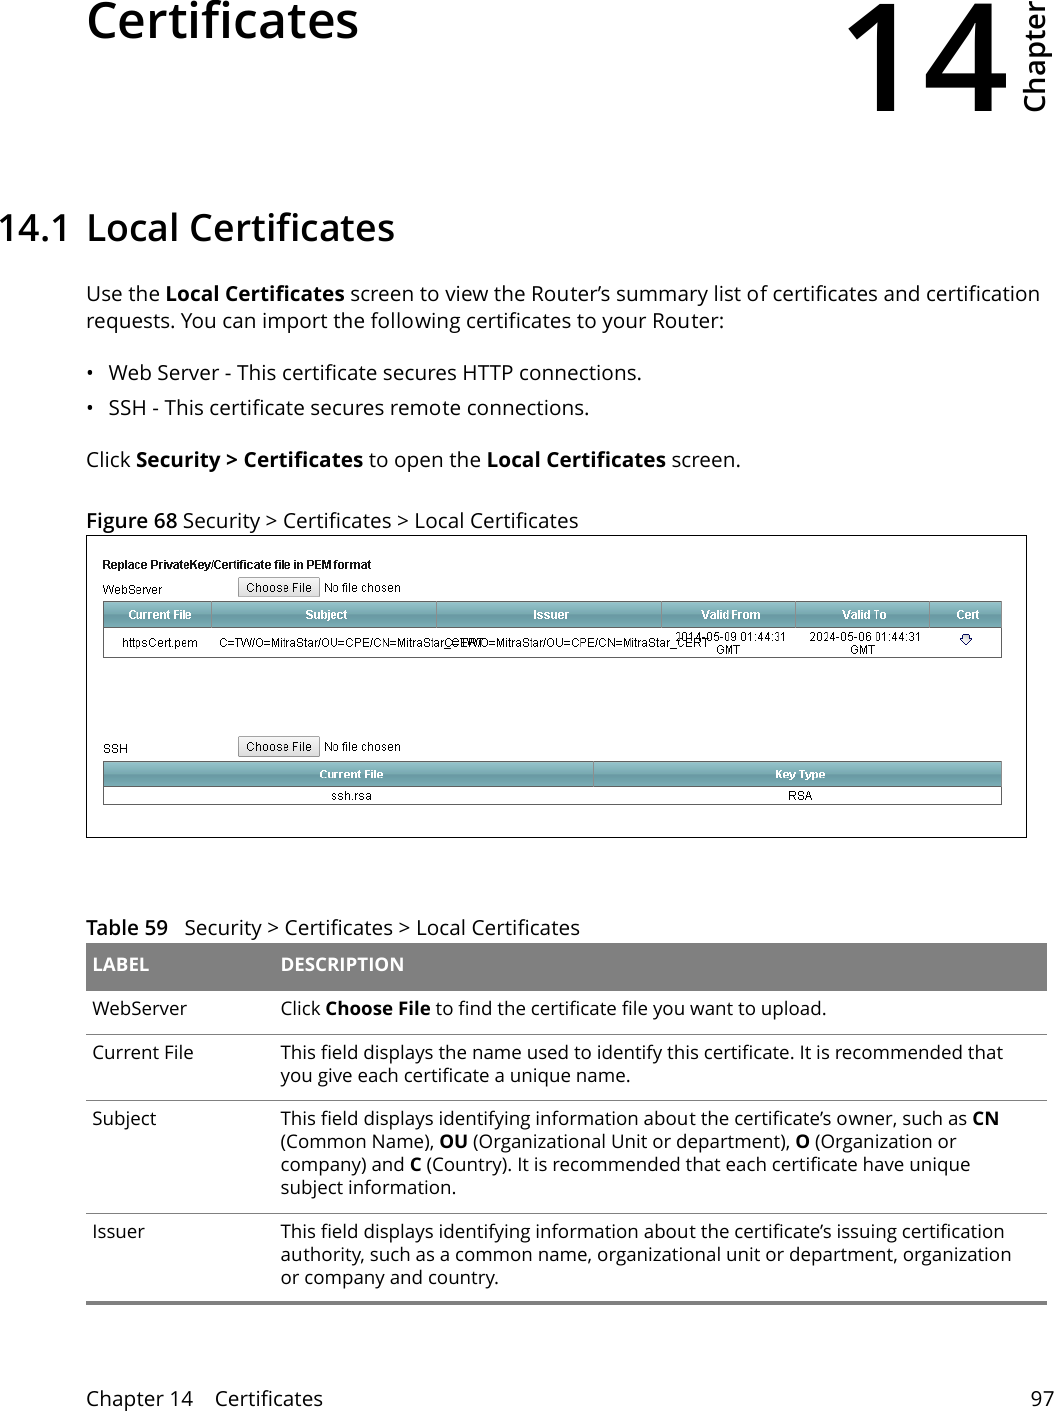 14Chapter Chapter 14    Certificates 97CHAPTER 14 Chapter 14 Certificates14.1 Local CertificatesUse the Local Certificates screen to view the Router’s summary list of certificates and certification requests. You can import the following certificates to your Router:• Web Server - This certificate secures HTTP connections.• SSH - This certificate secures remote connections.Click Security &gt; Certificates to open the Local Certificates screen. Figure 68 Security &gt; Certificates &gt; Local Certificates   Table 59   Security &gt; Certificates &gt; Local Certificates LABEL DESCRIPTIONWebServer  Click Choose File to find the certificate file you want to upload. Current File This field displays the name used to identify this certificate. It is recommended that you give each certificate a unique name. Subject This field displays identifying information about the certificate’s owner, such as CN (Common Name), OU (Organizational Unit or department), O (Organization or company) and C (Country). It is recommended that each certificate have unique subject information. Issuer This field displays identifying information about the certificate’s issuing certification authority, such as a common name, organizational unit or department, organization or company and country.